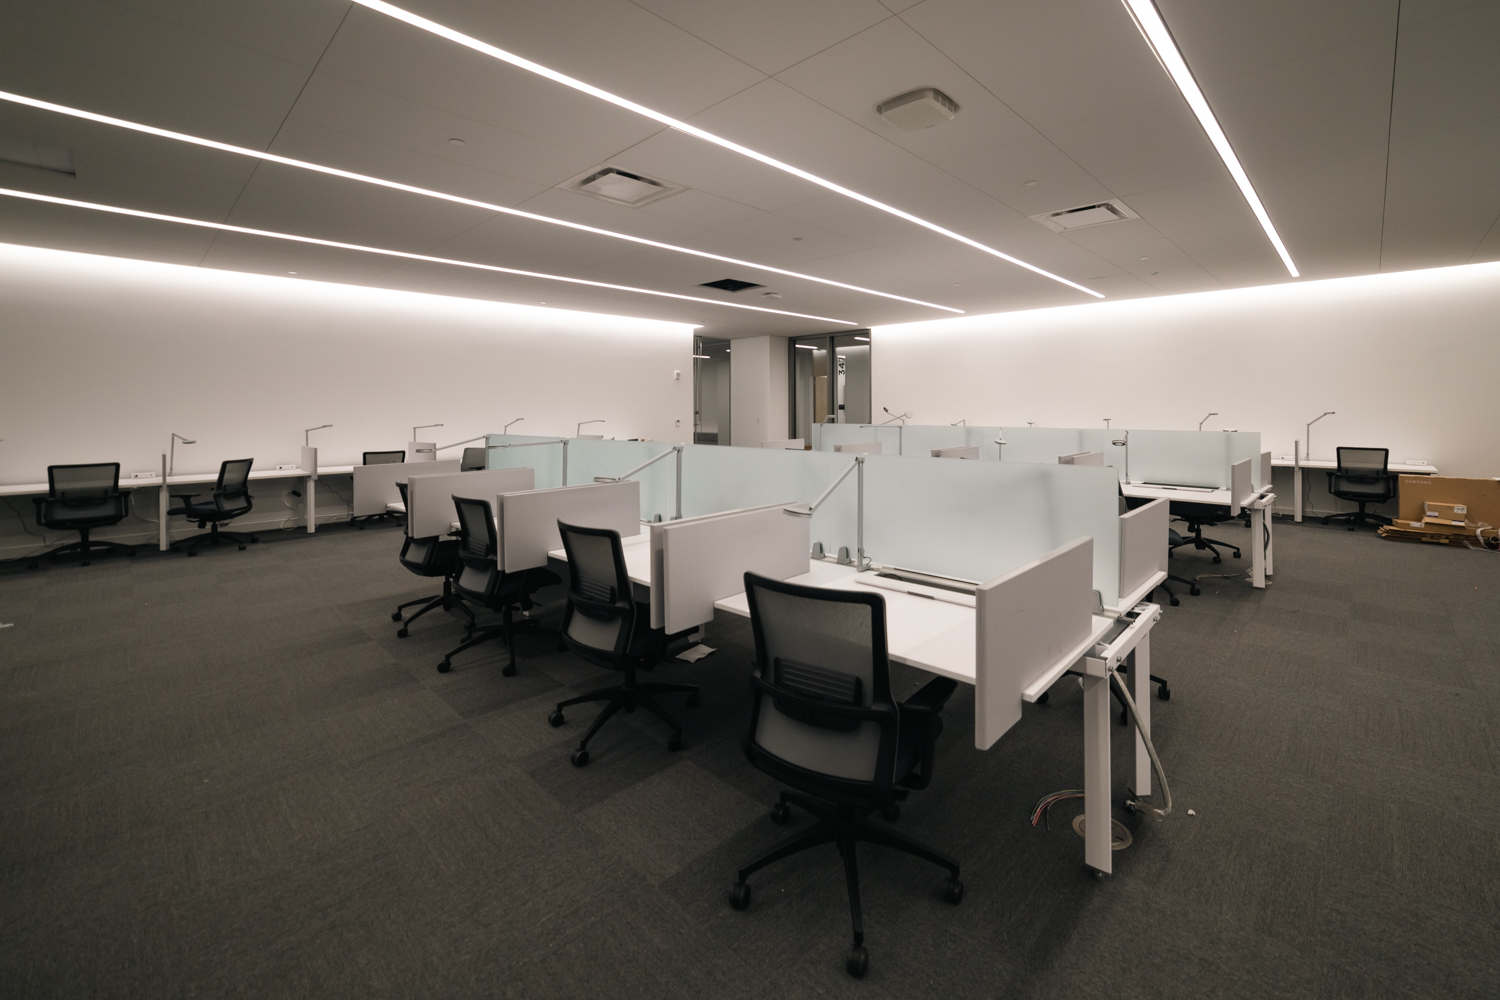 A quiet study room with white walls and several rows of white desks and black office chairs. The desks are separated from each other with boards made from glass and wood.